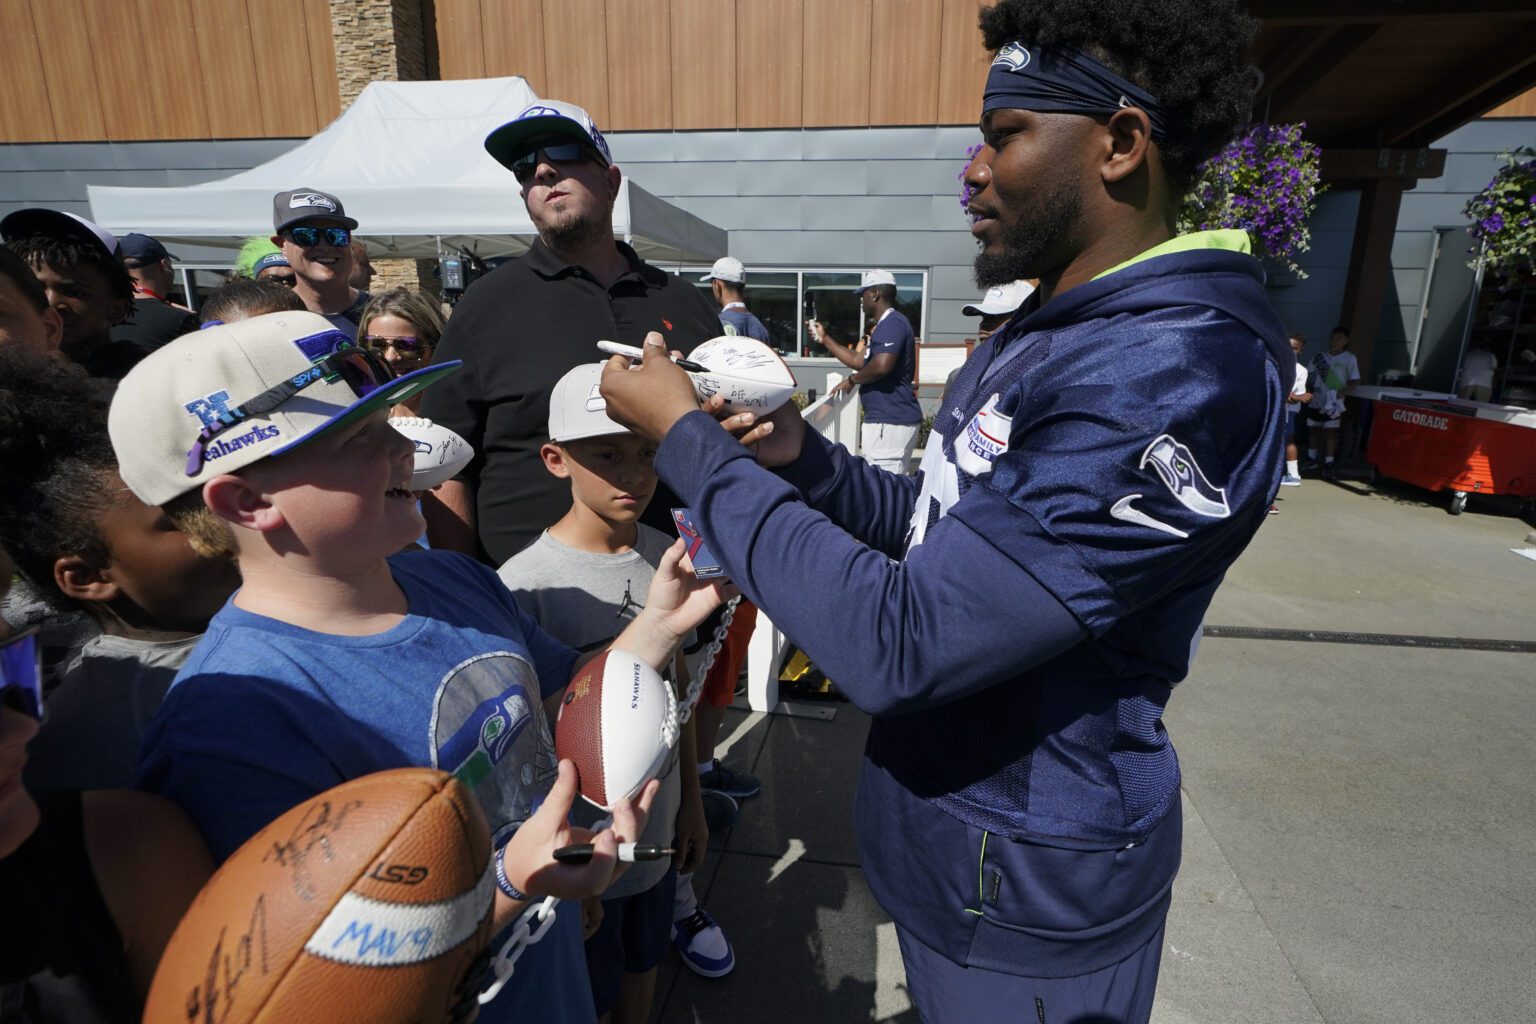 Seattle Seahawks running back Rashaad Penny signs autographs for fans after NFL football practice Aug. 3 in Renton.